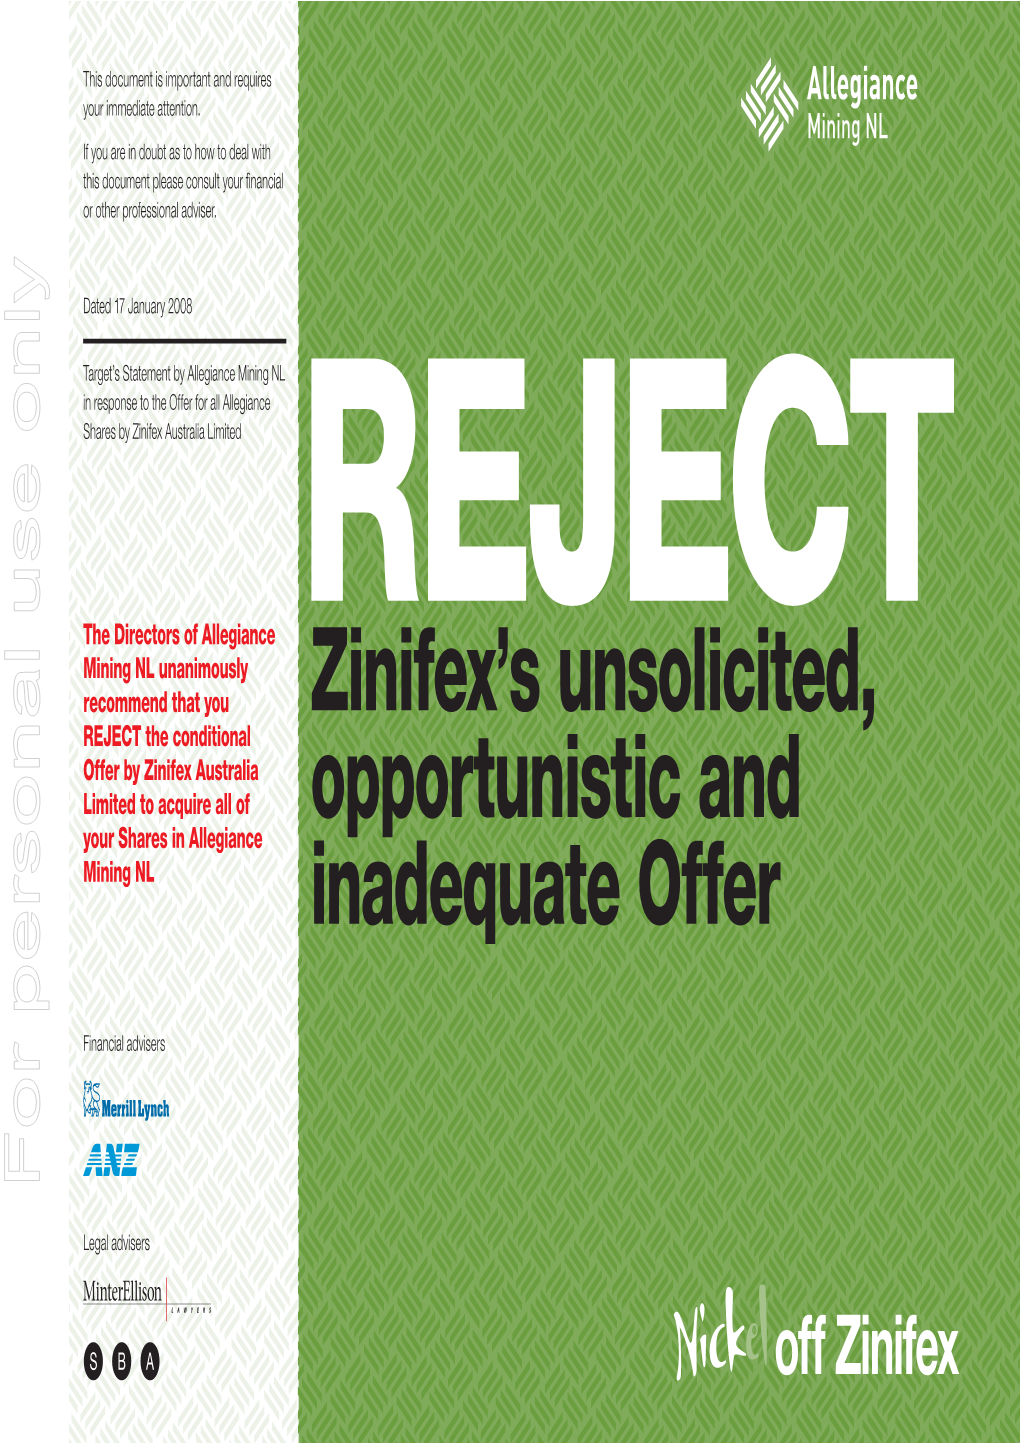 Zinifex's Unsolicited, Opportunistic and Inadequate Offer